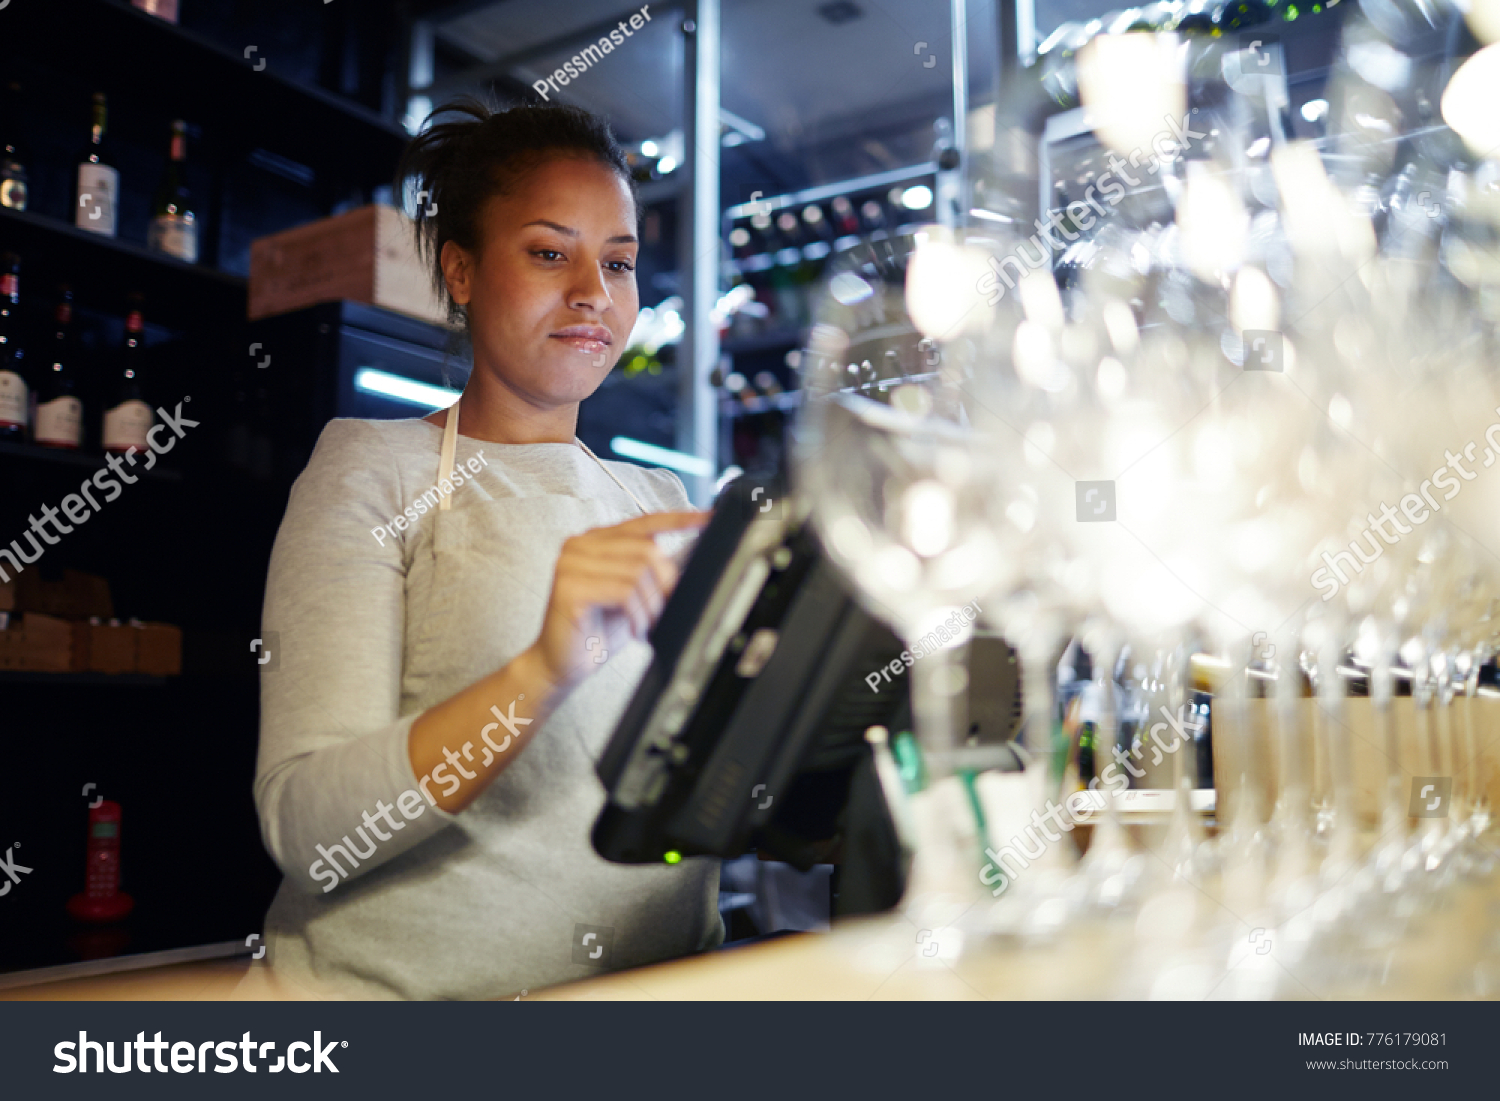 Worker of modern pub, bar or restaurant standing in front of computer monitor and giving new orders to kitchen #776179081